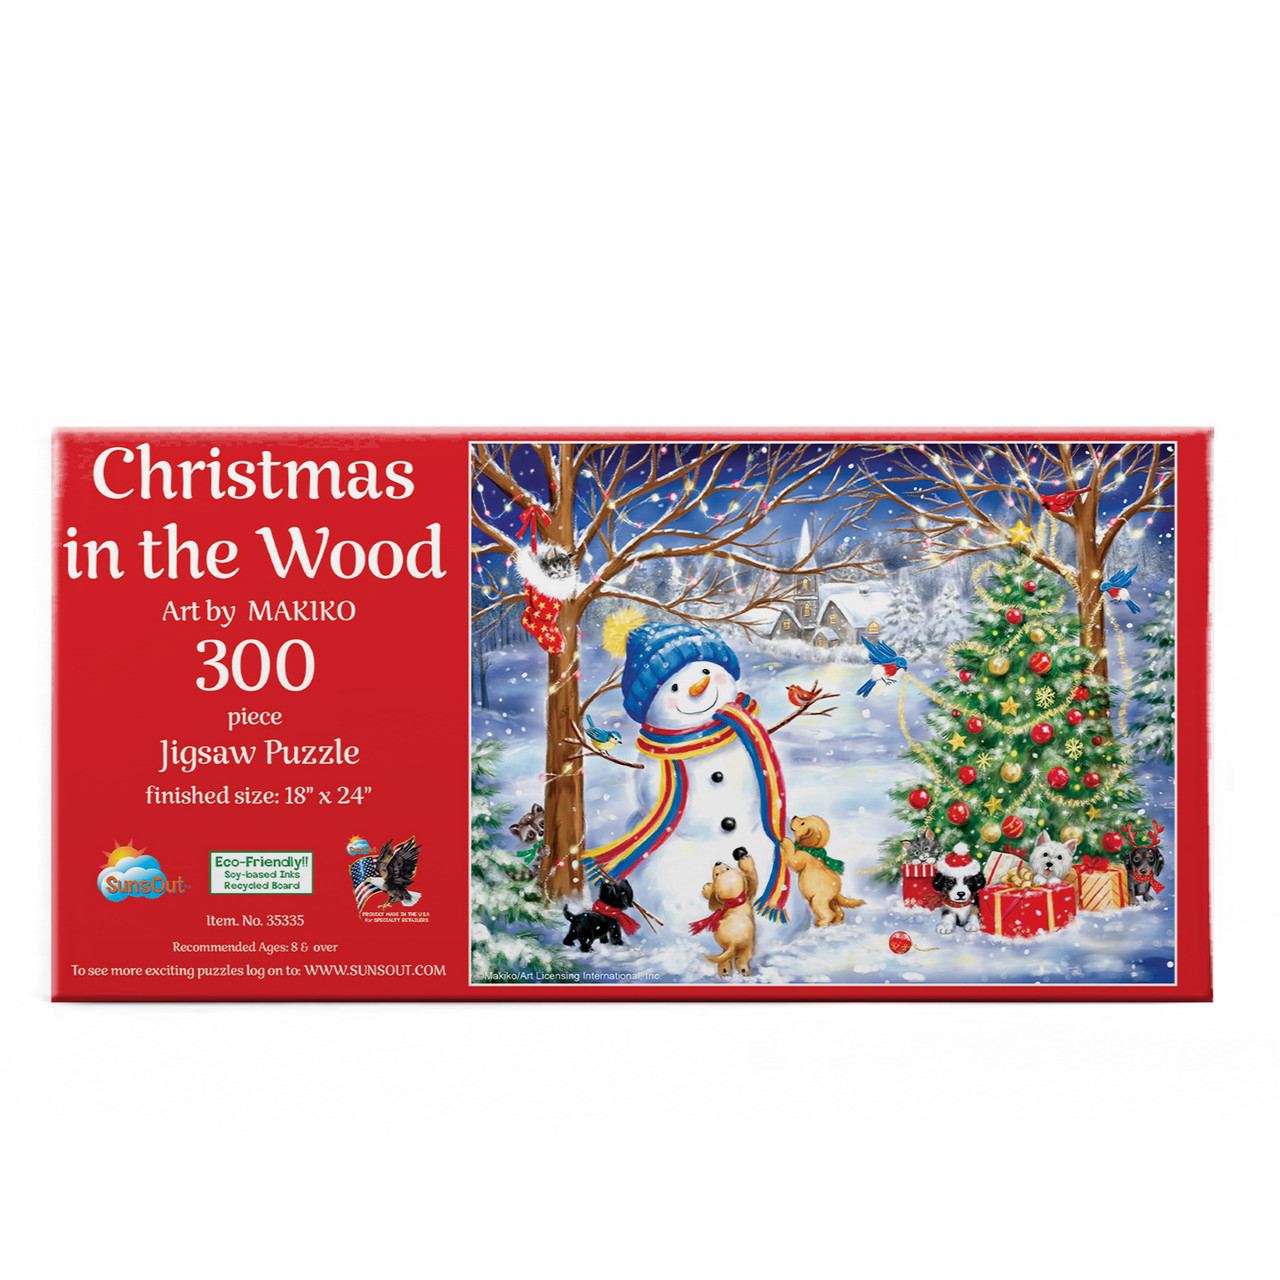 My Christmas Wish, 300 Pieces, SunsOut